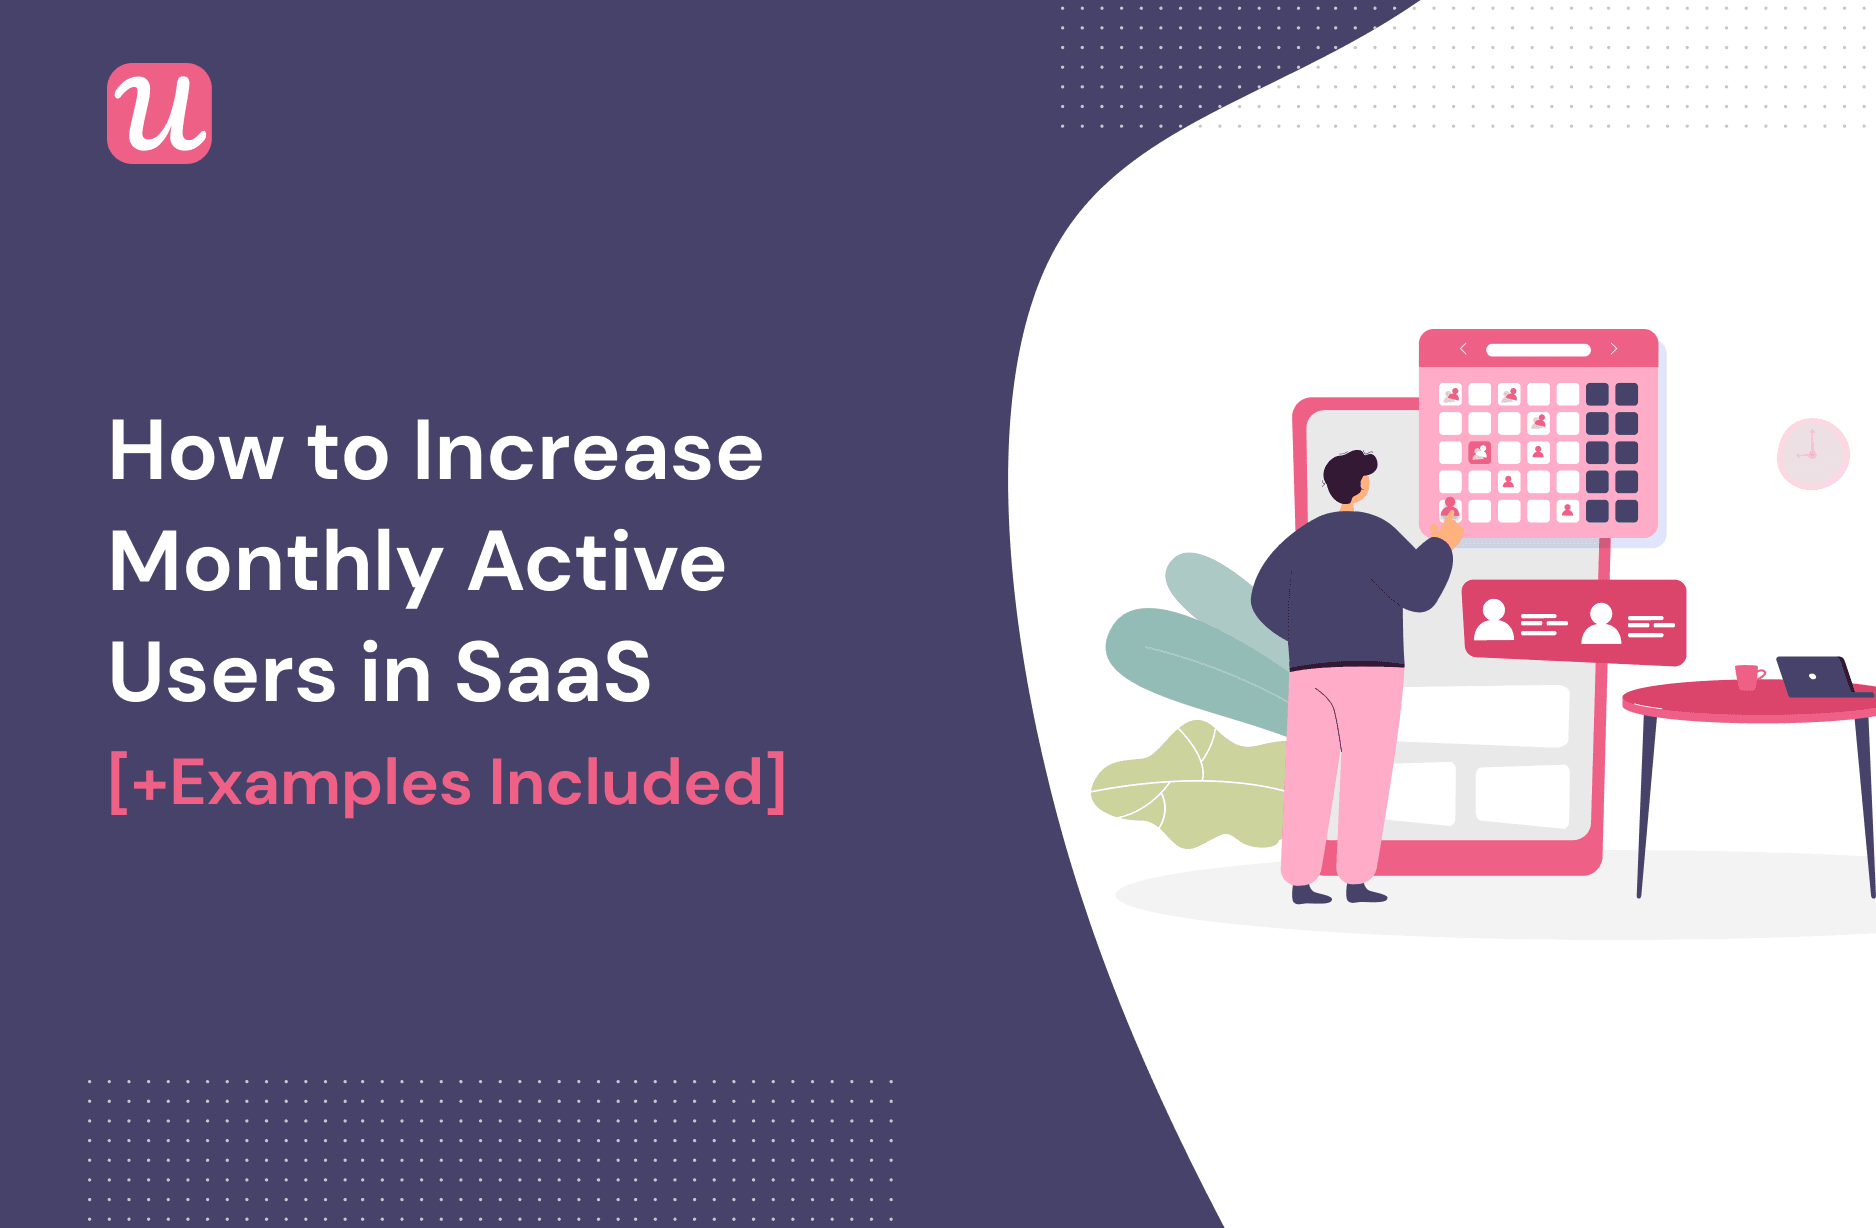 How to Increase Monthly Active Users in SaaS [+Examples Included] cover